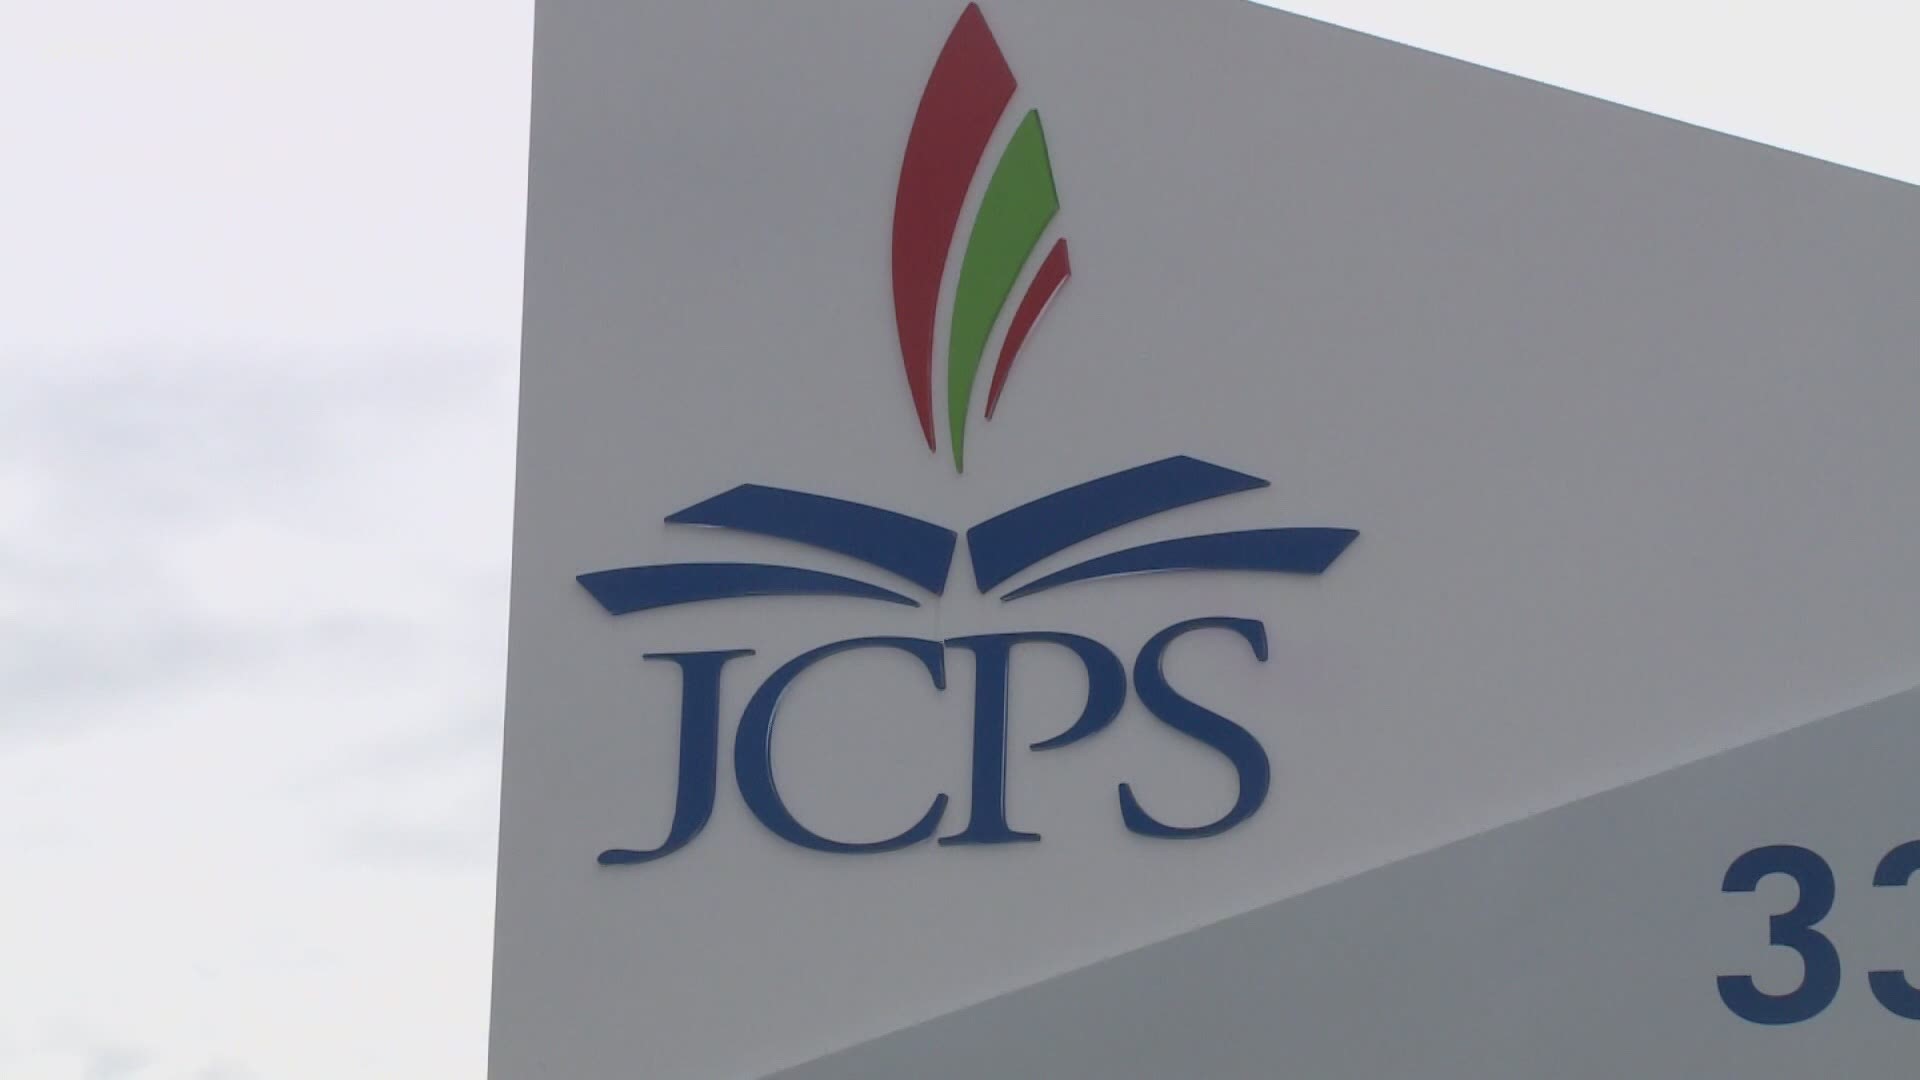 How JCPS Board members say they'll vote after an executive order from the governor says they should return March 1.